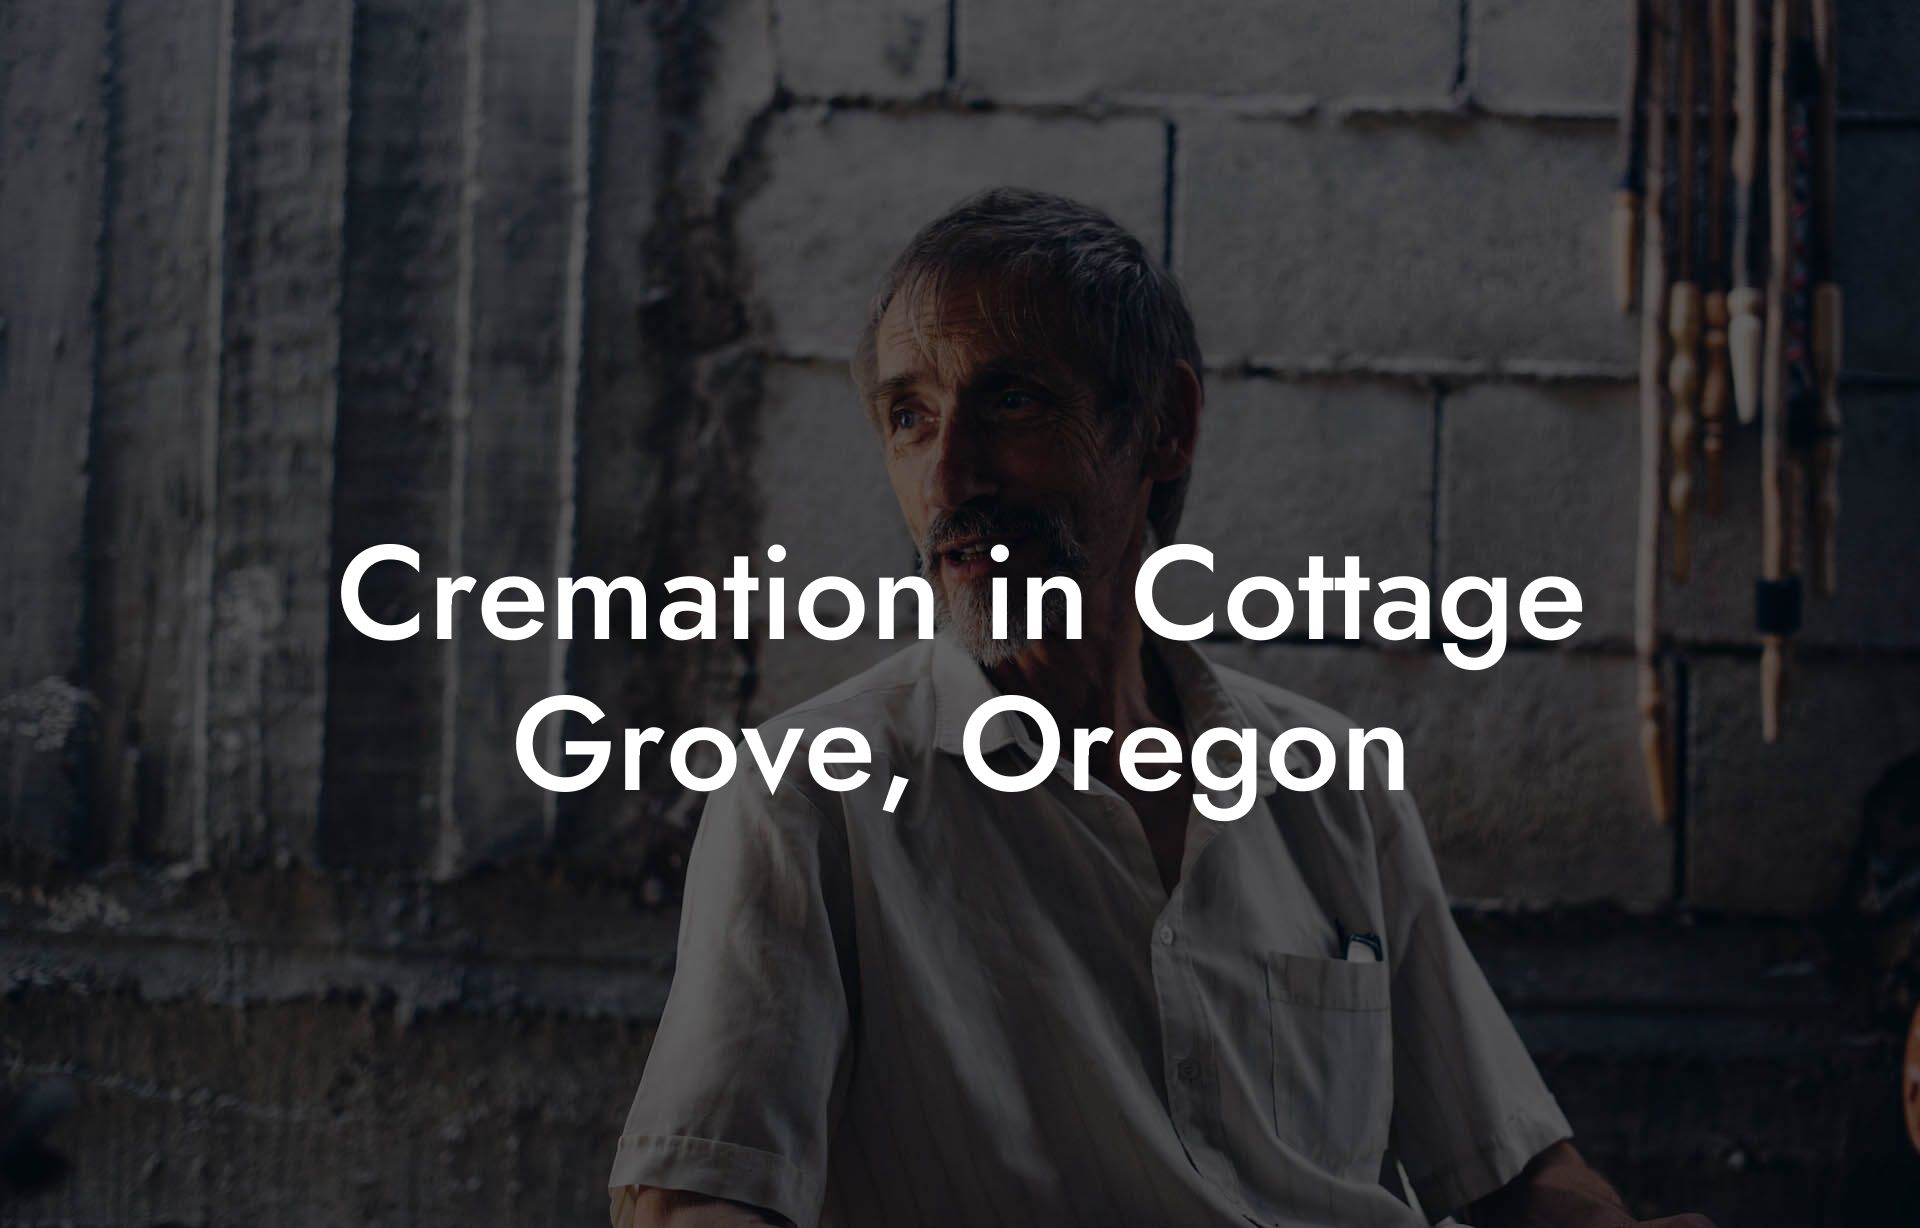 Cremation in Cottage Grove, Oregon